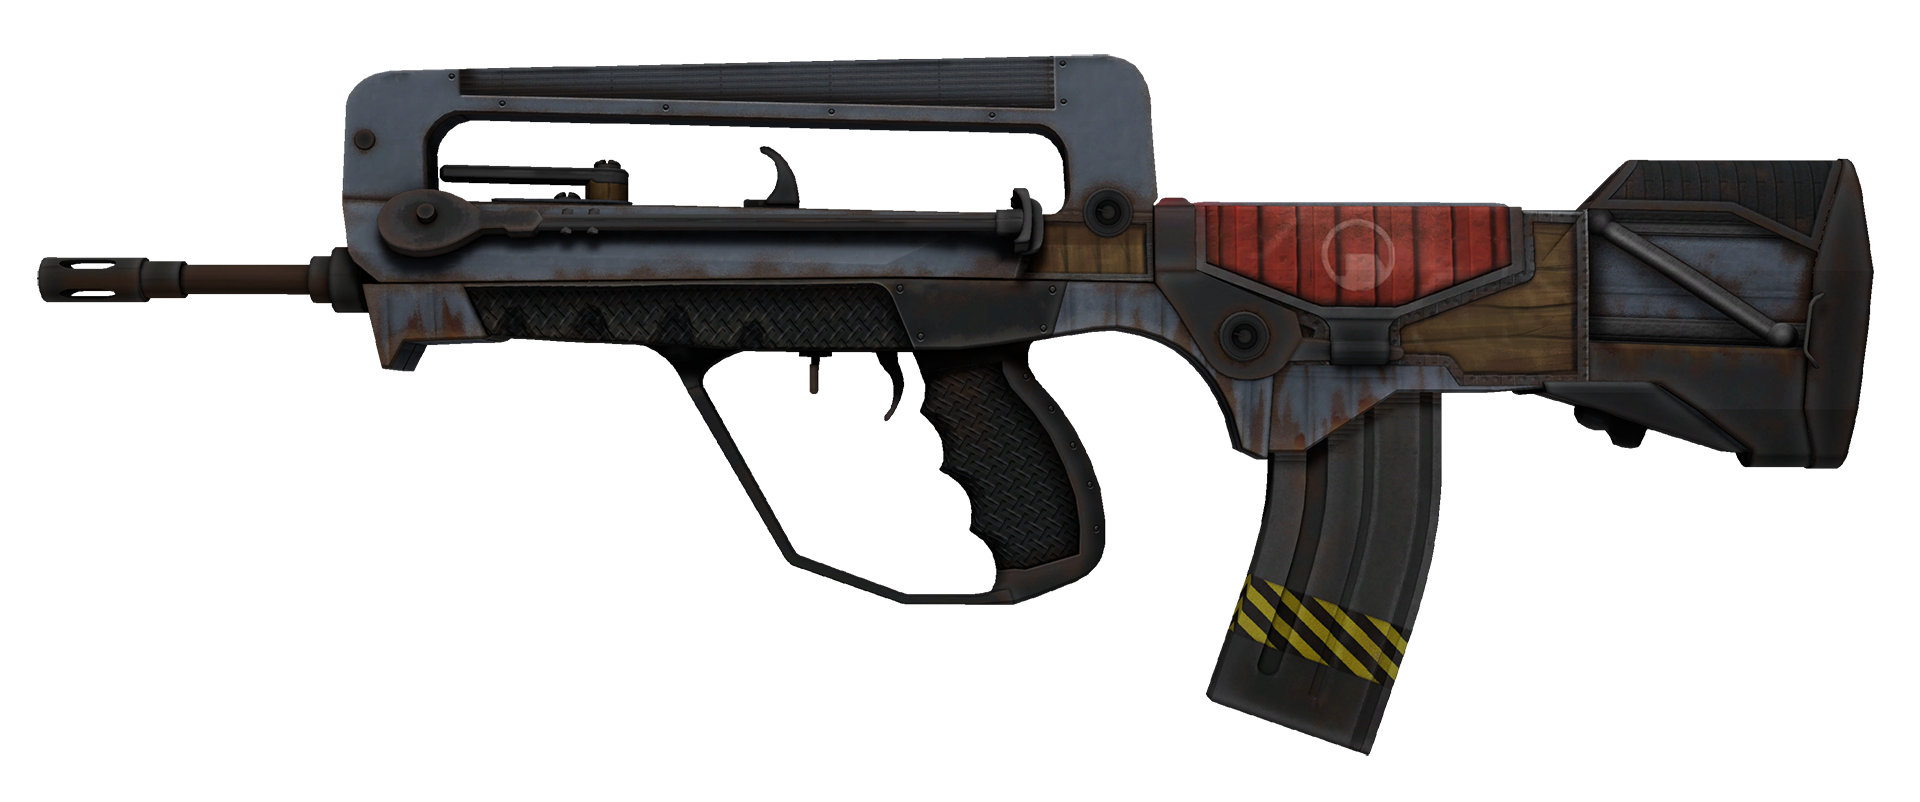 FAMAS Decommissioned Large Rendering